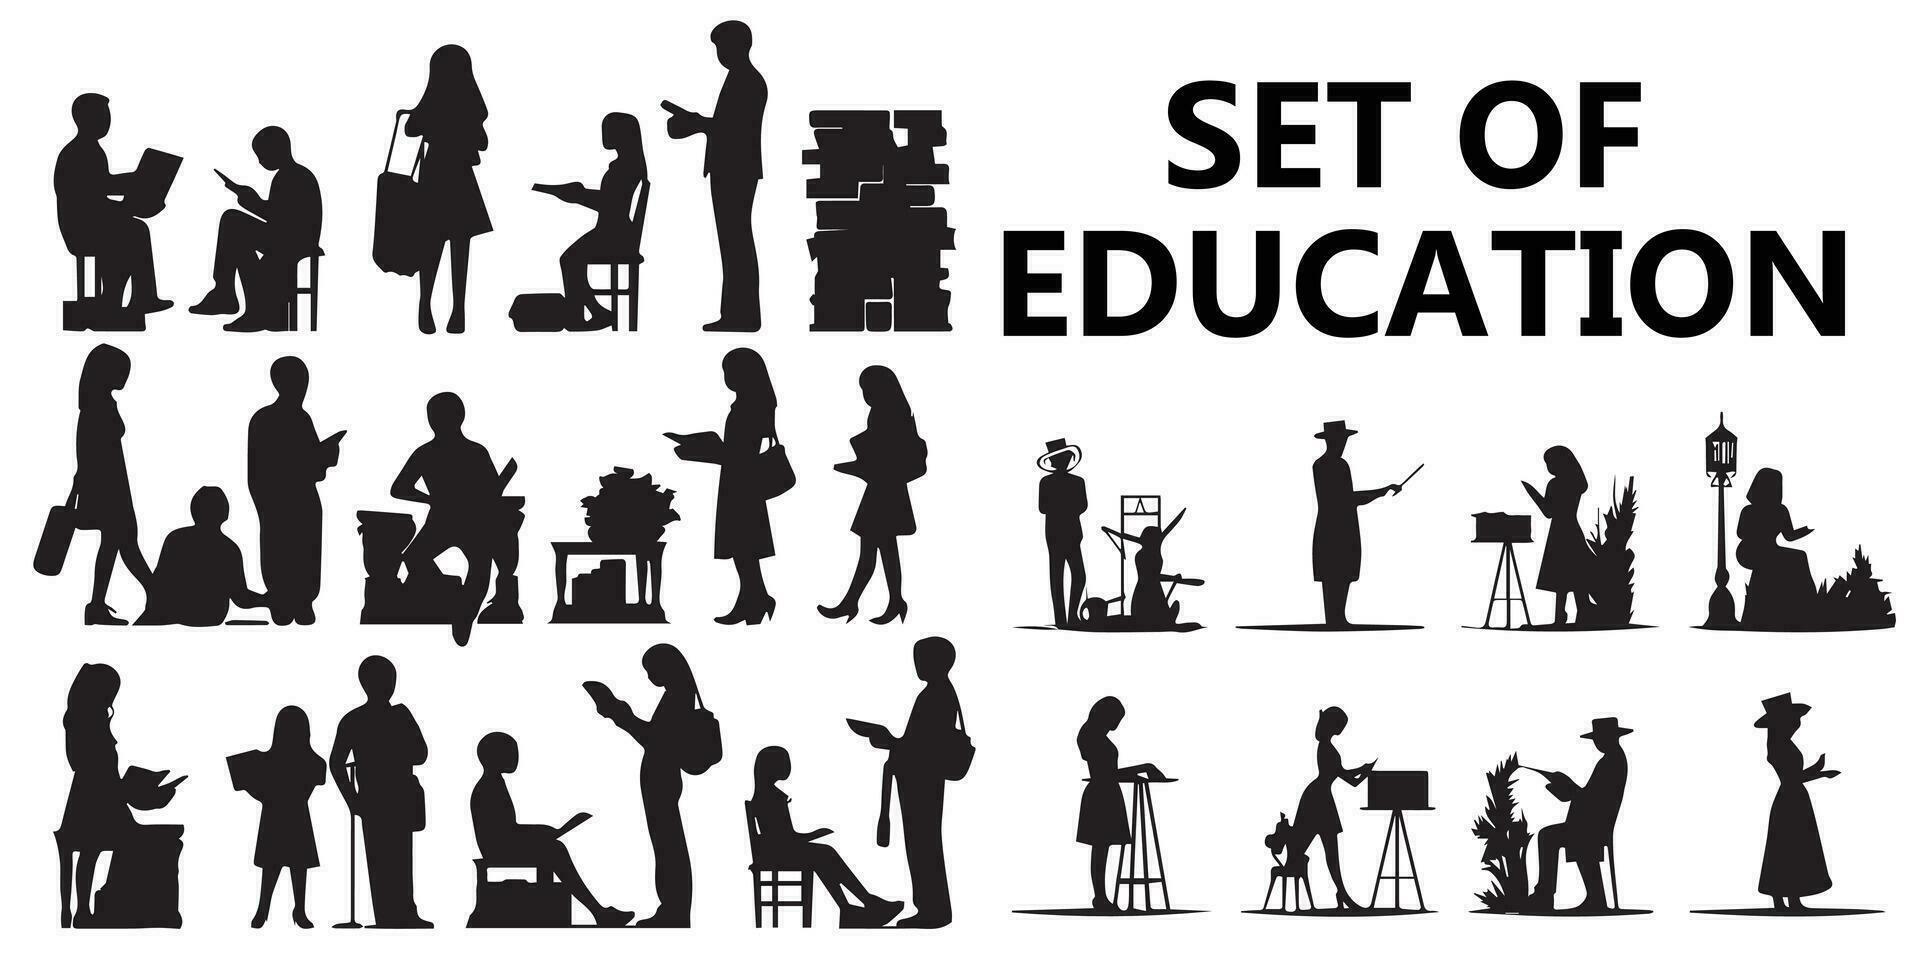 A set of education elements and students silhouette vector